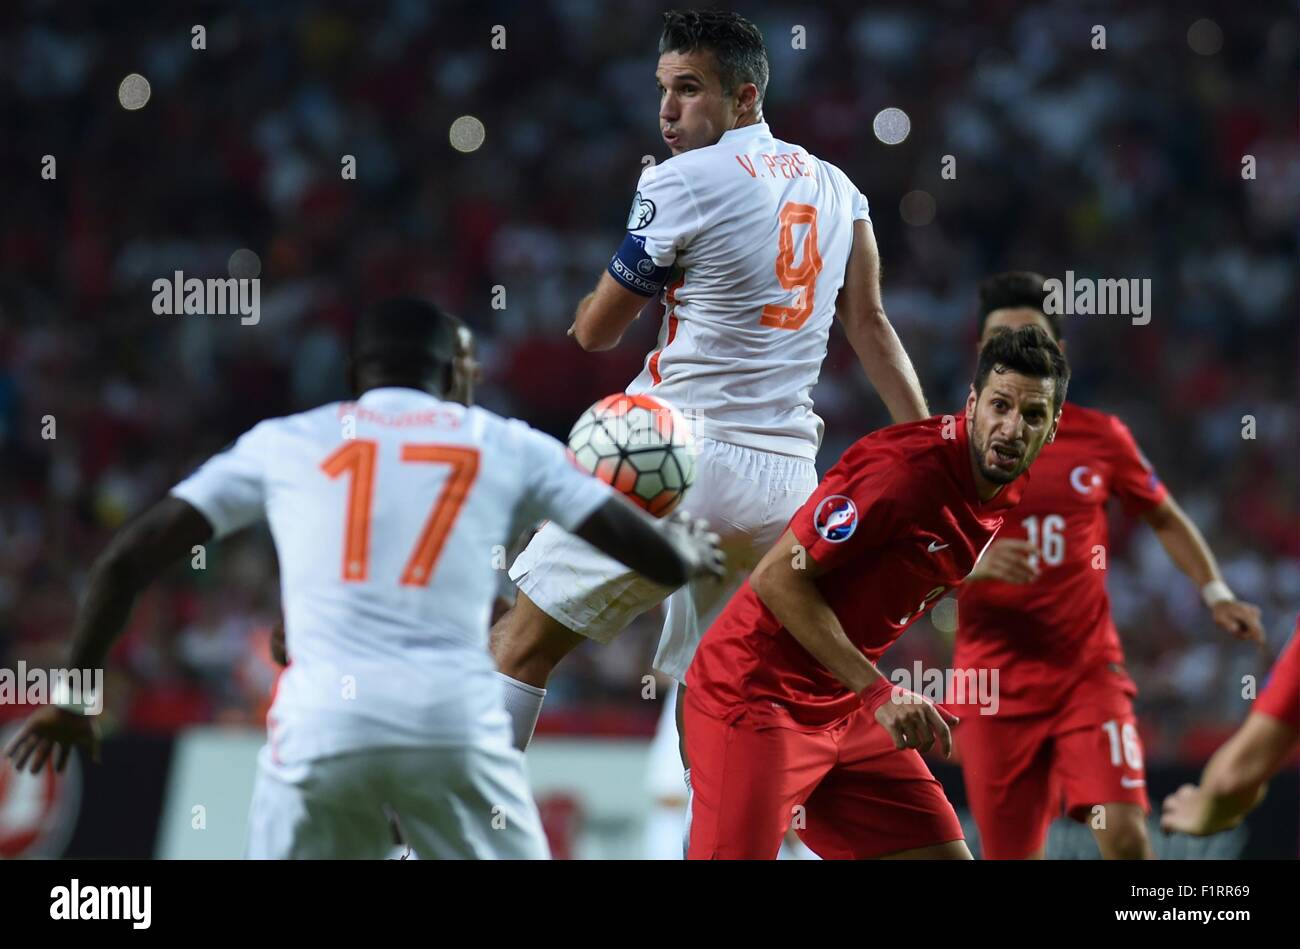 Konya, Turkey. 6th Sep, 2015. Robin van Persie (above) of the Netherlands competes during the UEFA Euro 2016 Group A qualifying match between Turkey and the Netherlands in Konya, Turkey, on Sept. 6, 2015. The Netherlands lost 0-3. Credit:  He Canling/Xinhua/Alamy Live News Stock Photo